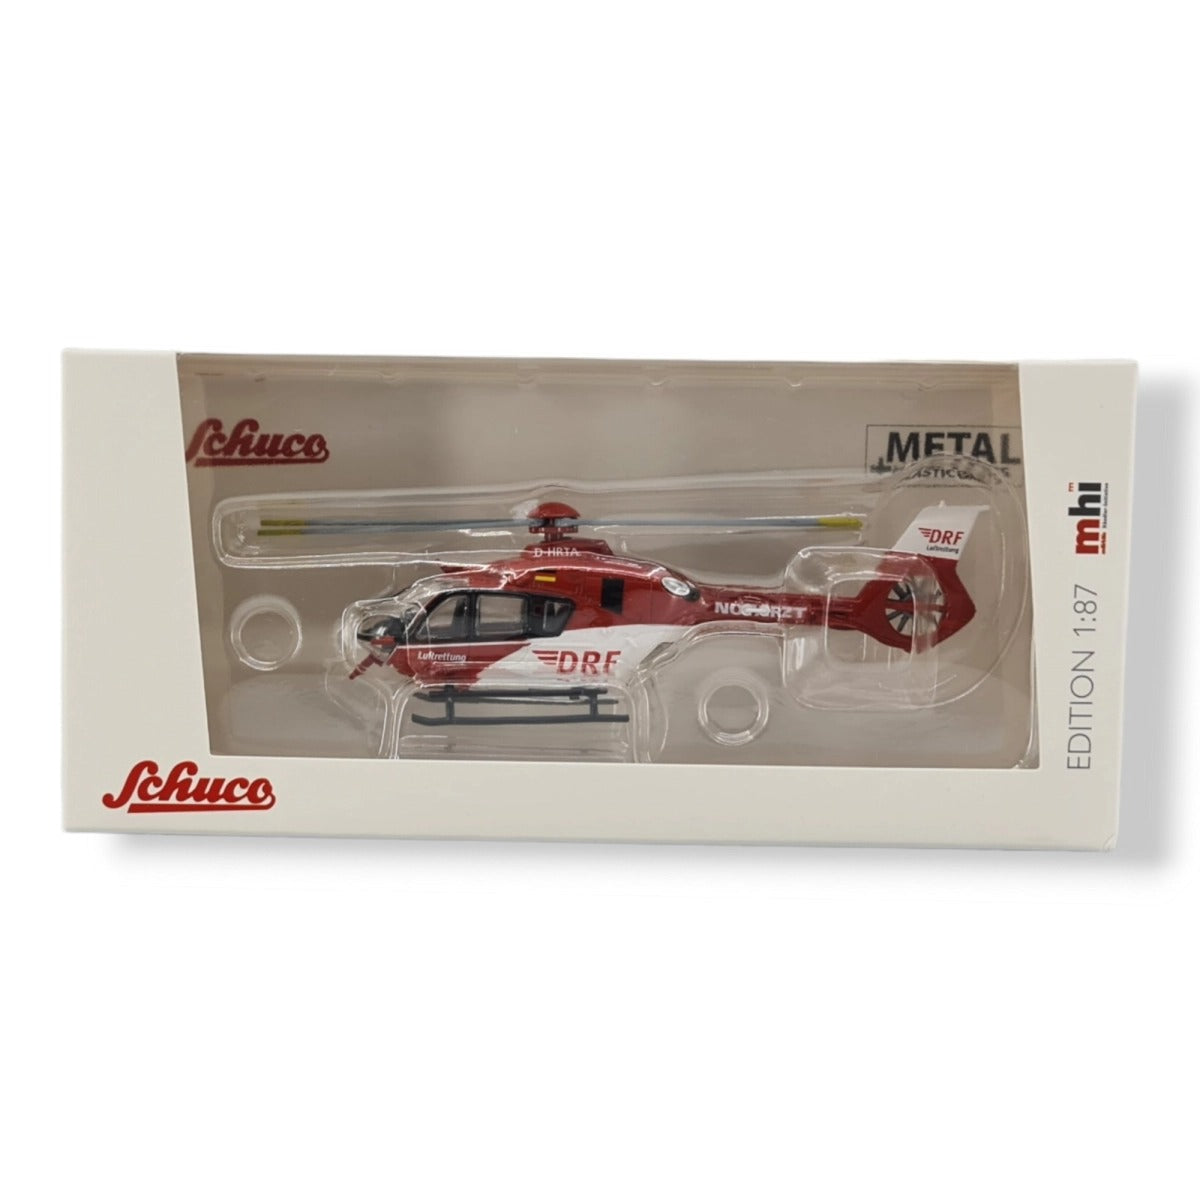 Schuco 1:87 Airbus H135 DRF Emergency Doctor Helicopter 452674100